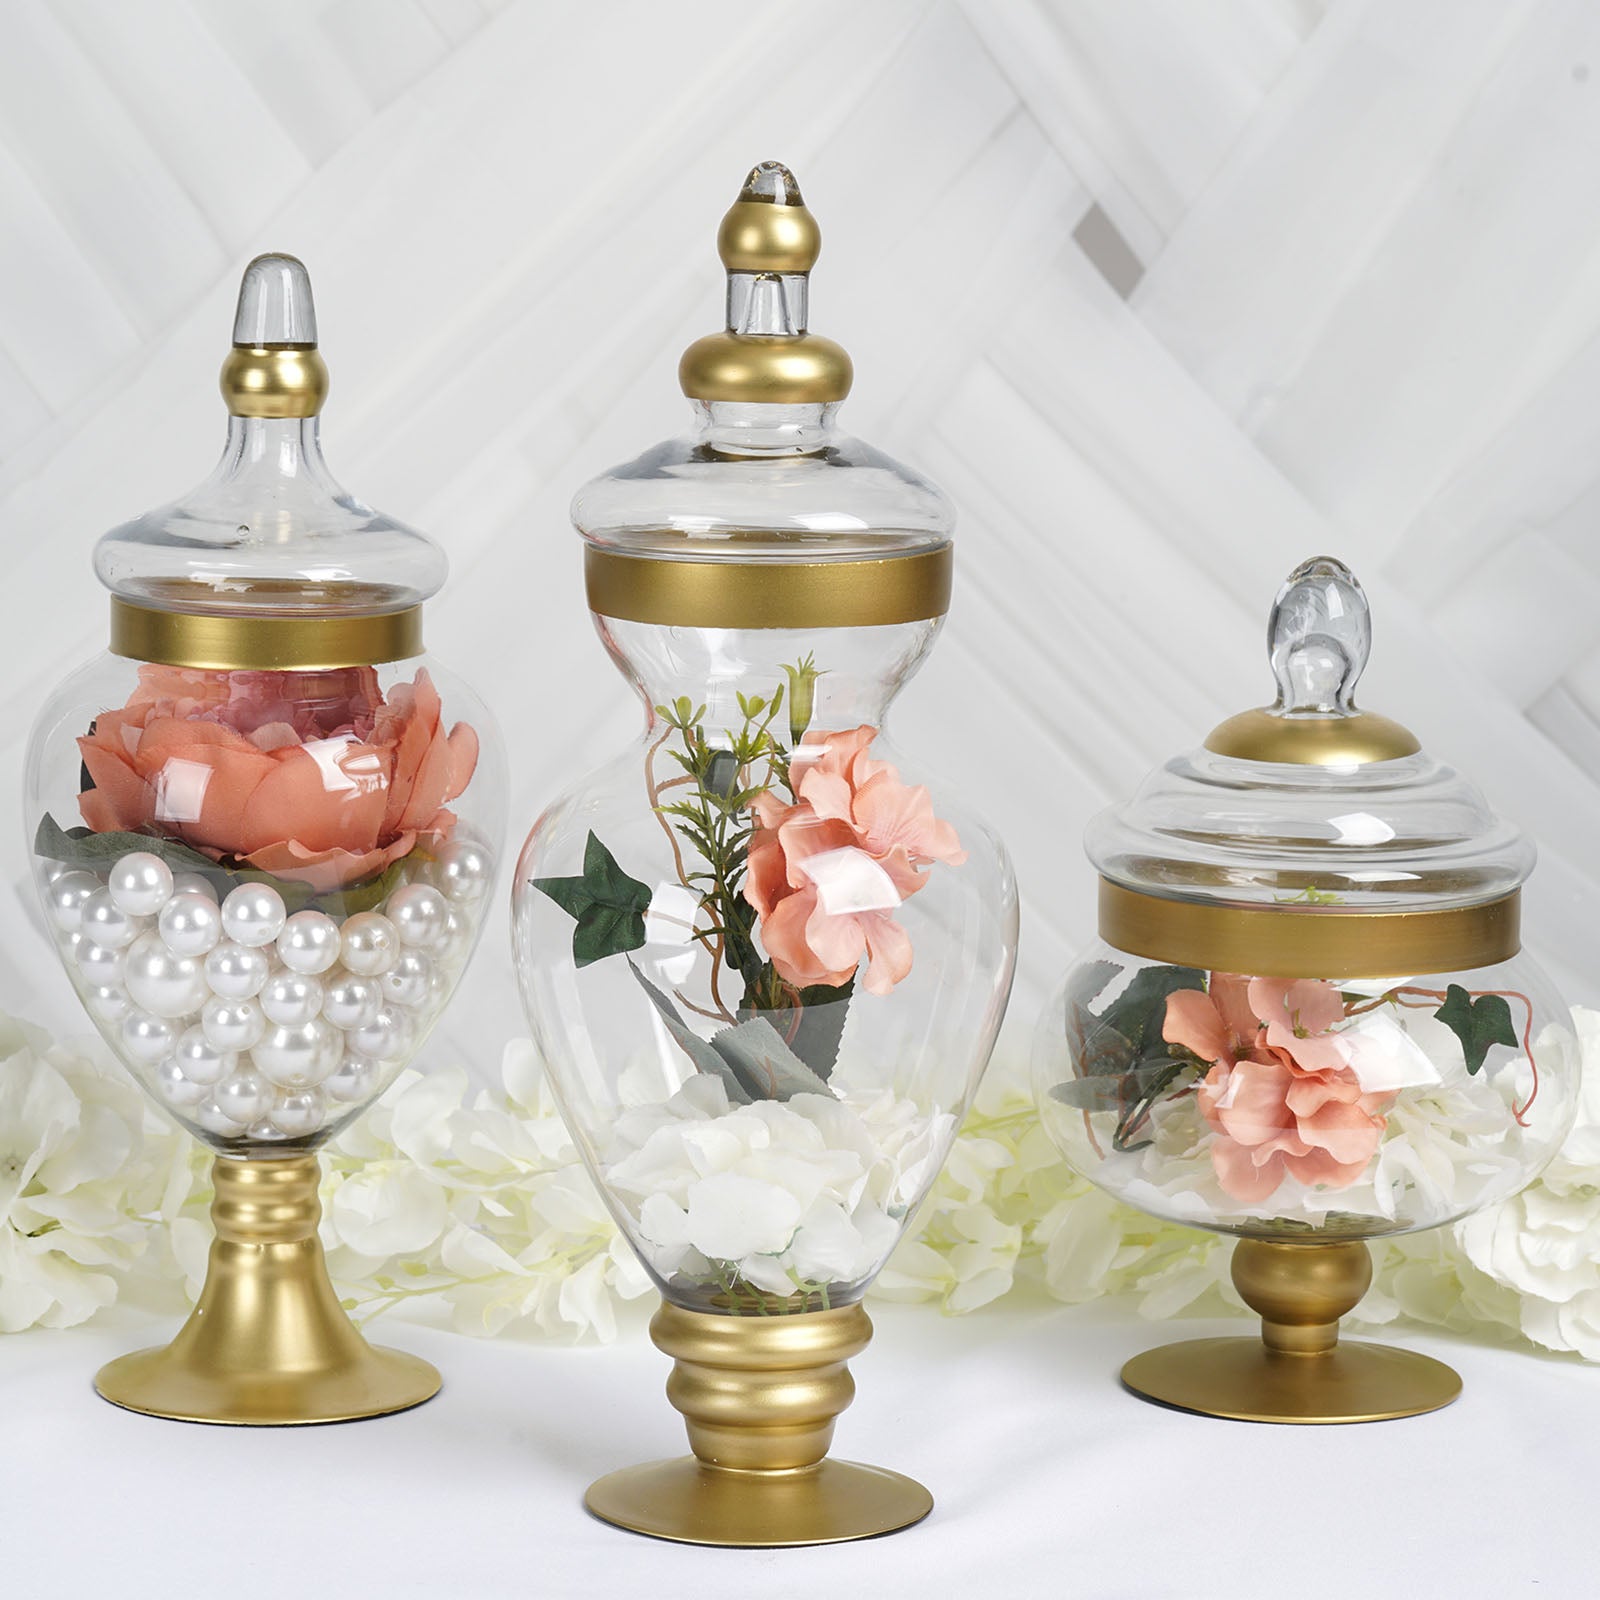 Set of 3 - Gold Trim Apothecary Jars, Glass Candy Jars With Lids - 9,9,8